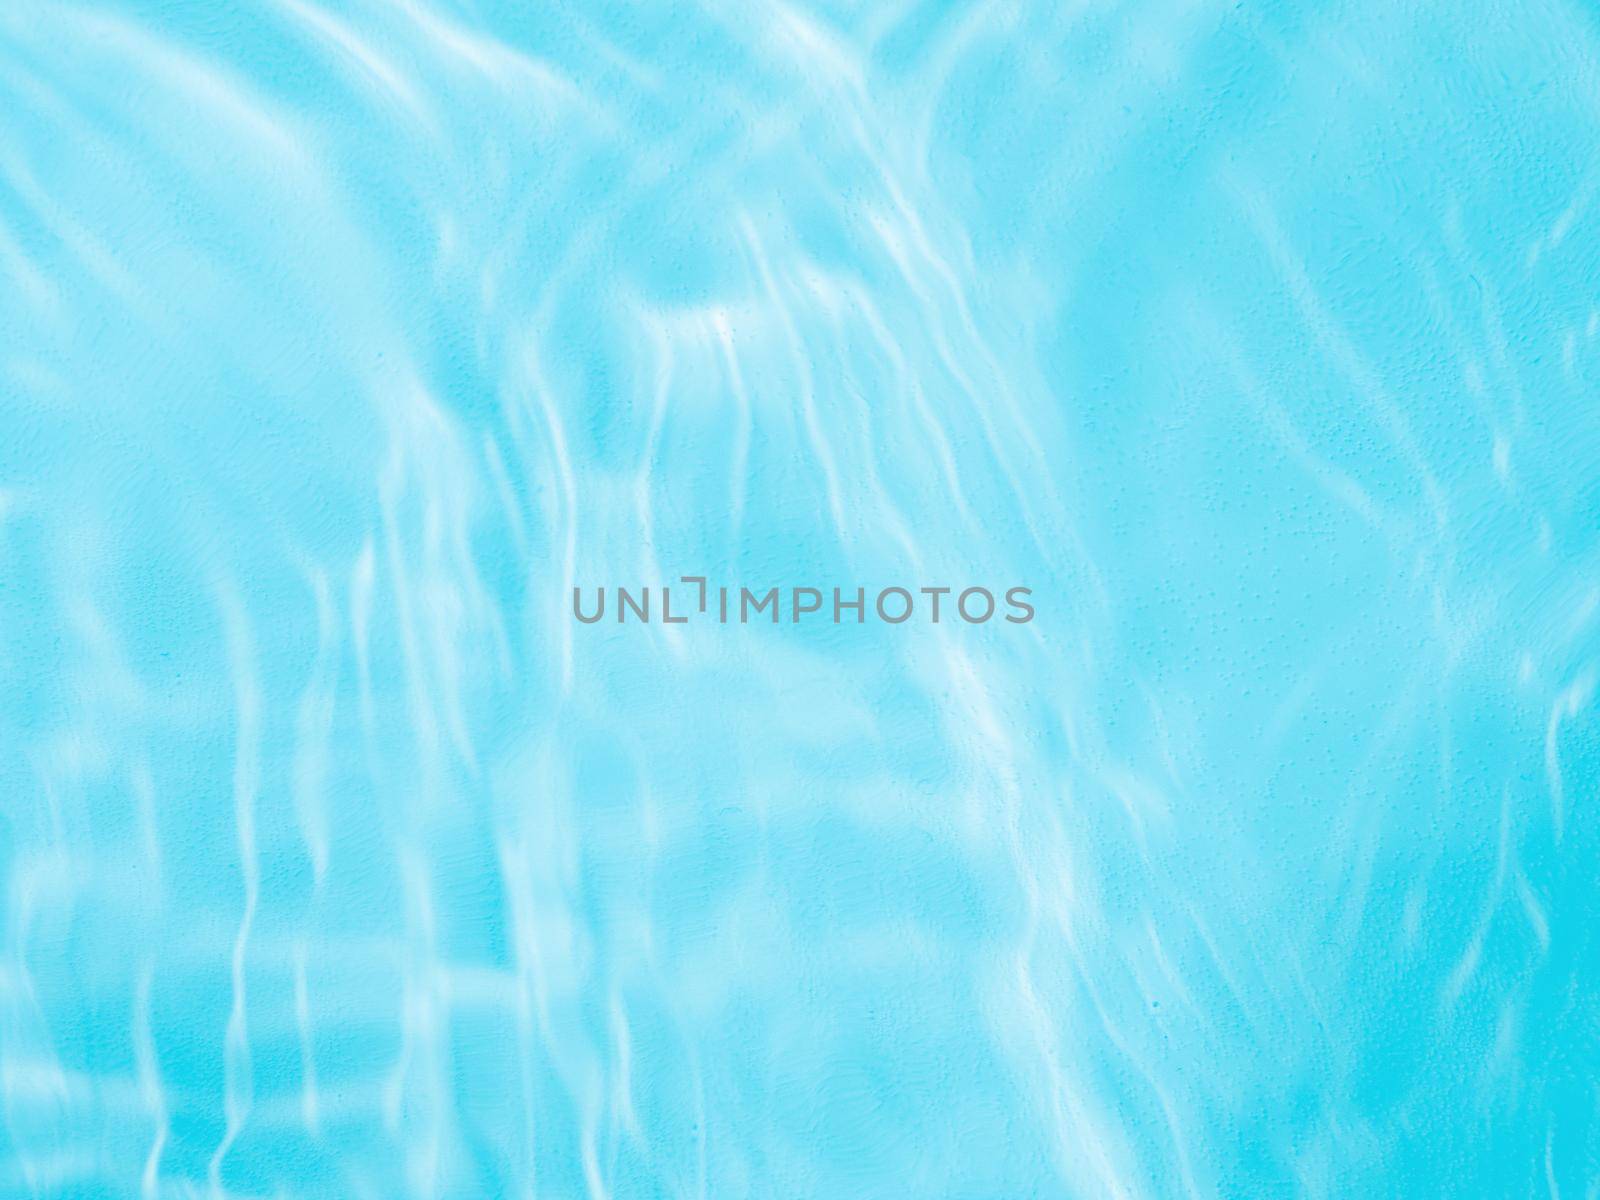 Ripple water texture on blue pool background. Shadow of water on sunlight. Mockup for product, spa or travel background. Marble blue water surface as wallpaper background